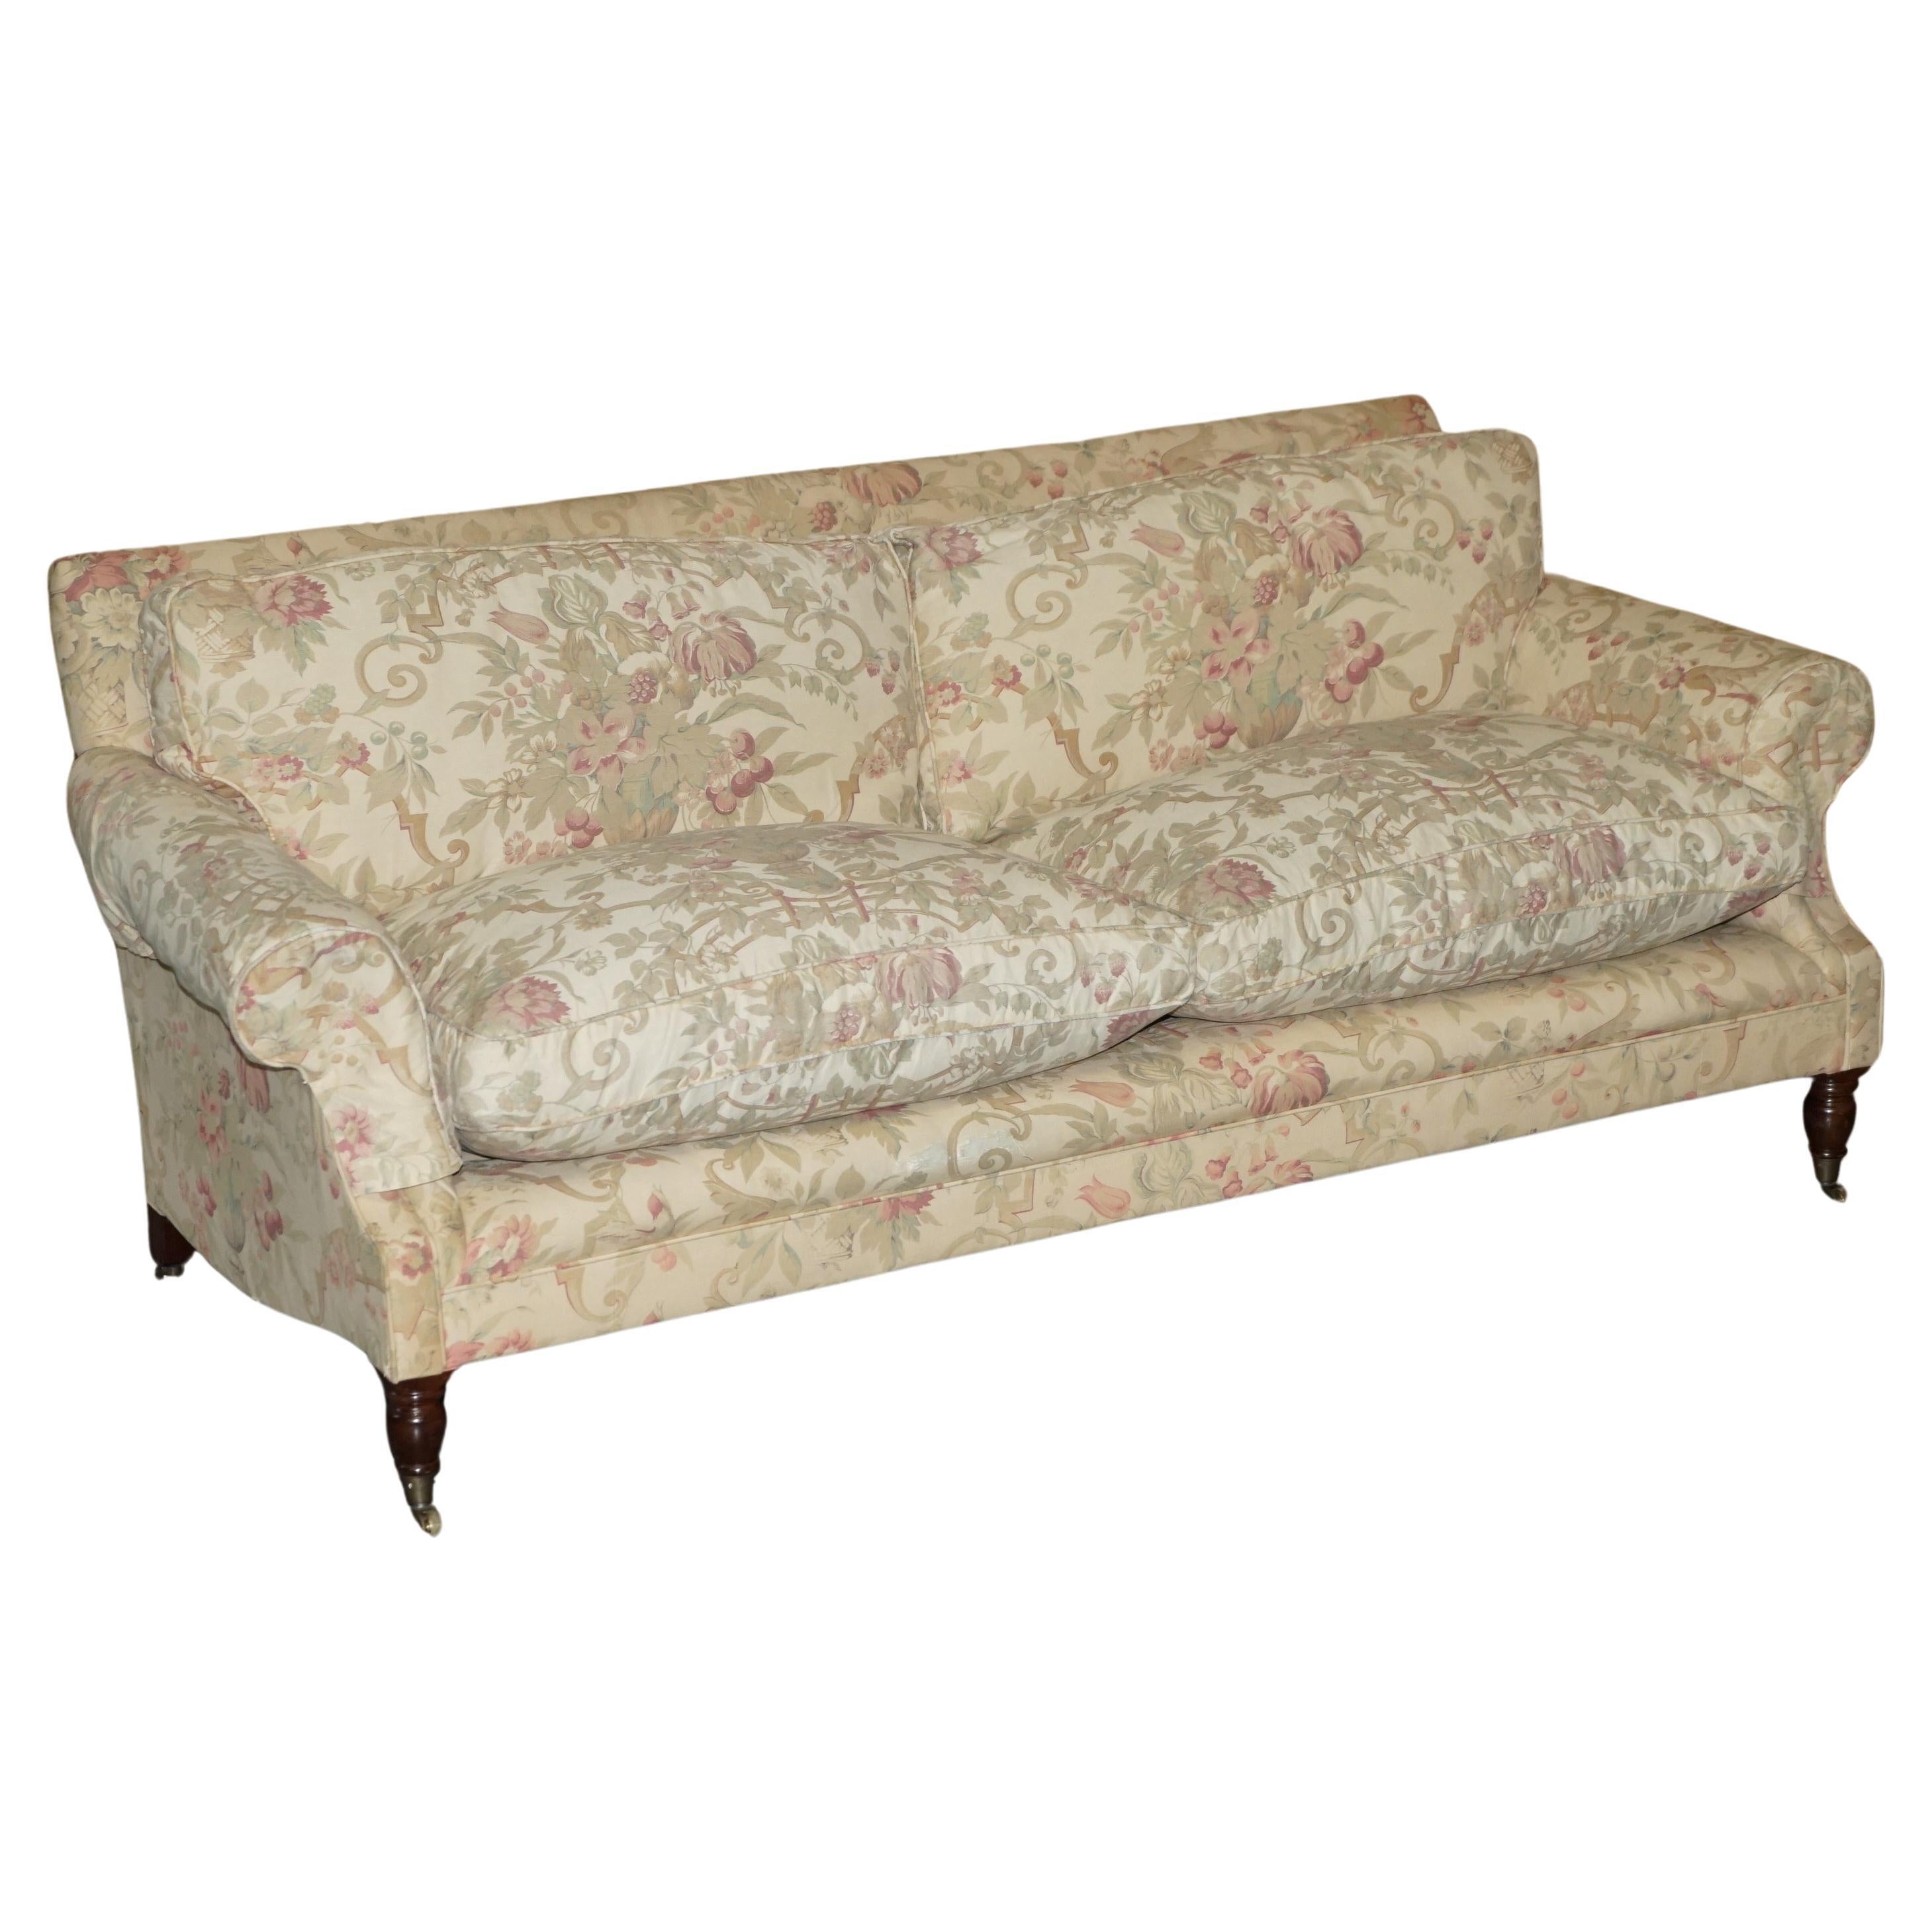 GEORGE SMITH CHELSEA 3 SEAT SOFA IN ORIGINAL UPHOLSTERY PART SUiTE im Angebot